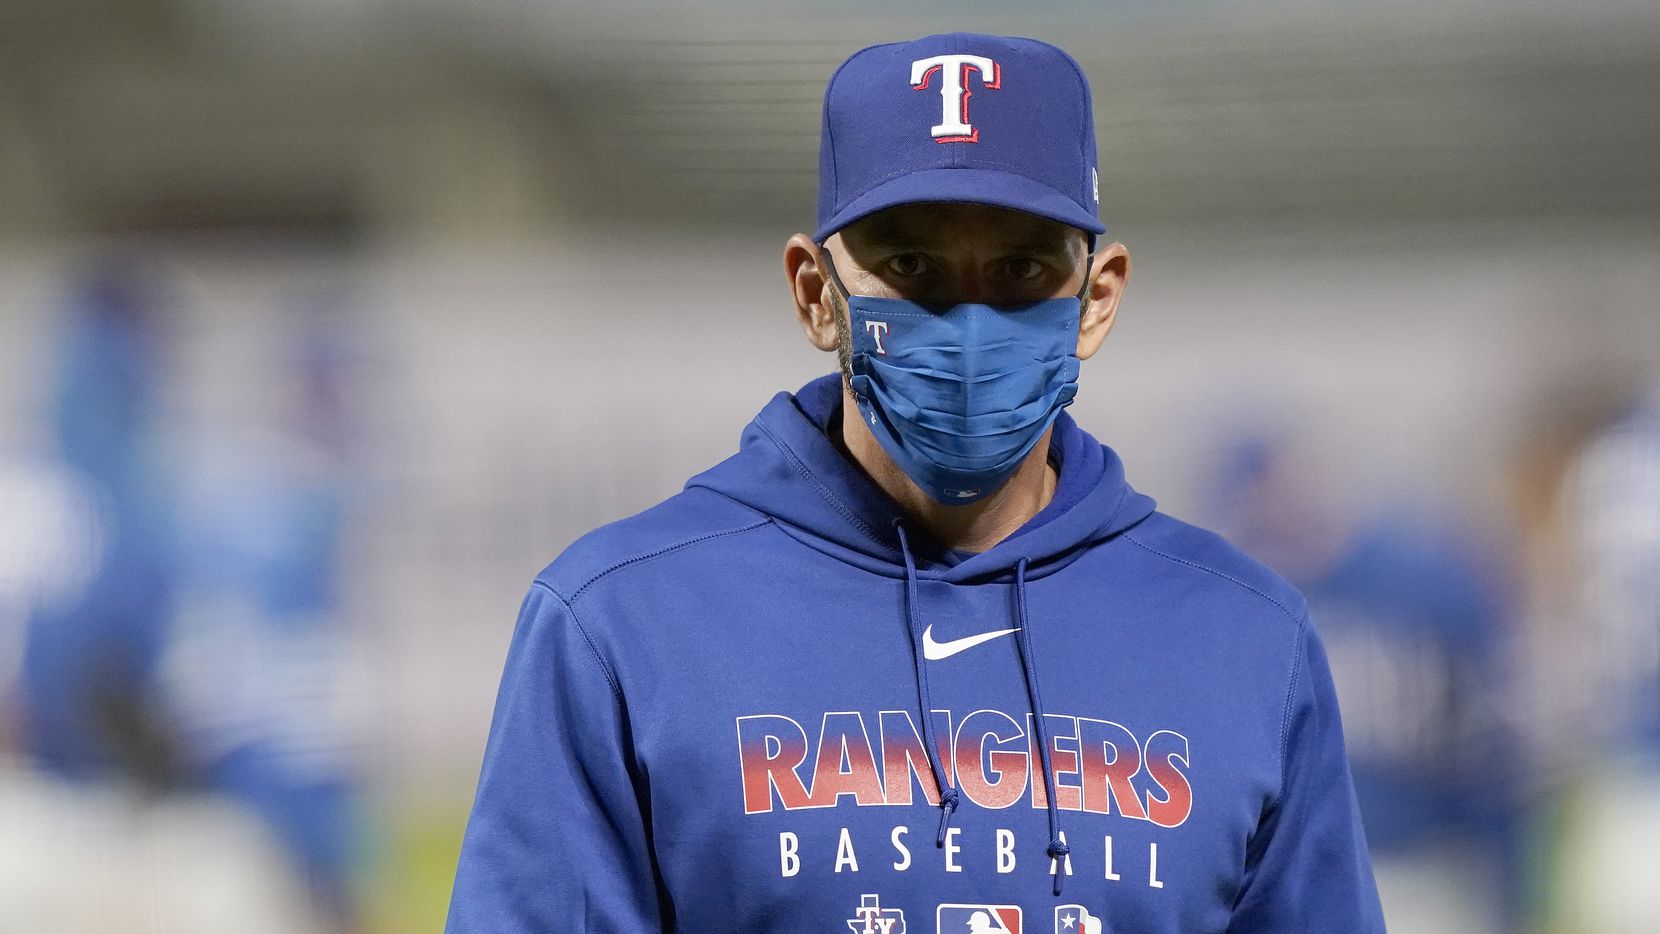 Rangers manager Chris Woodward walks back to the dugout after making a pitching change...